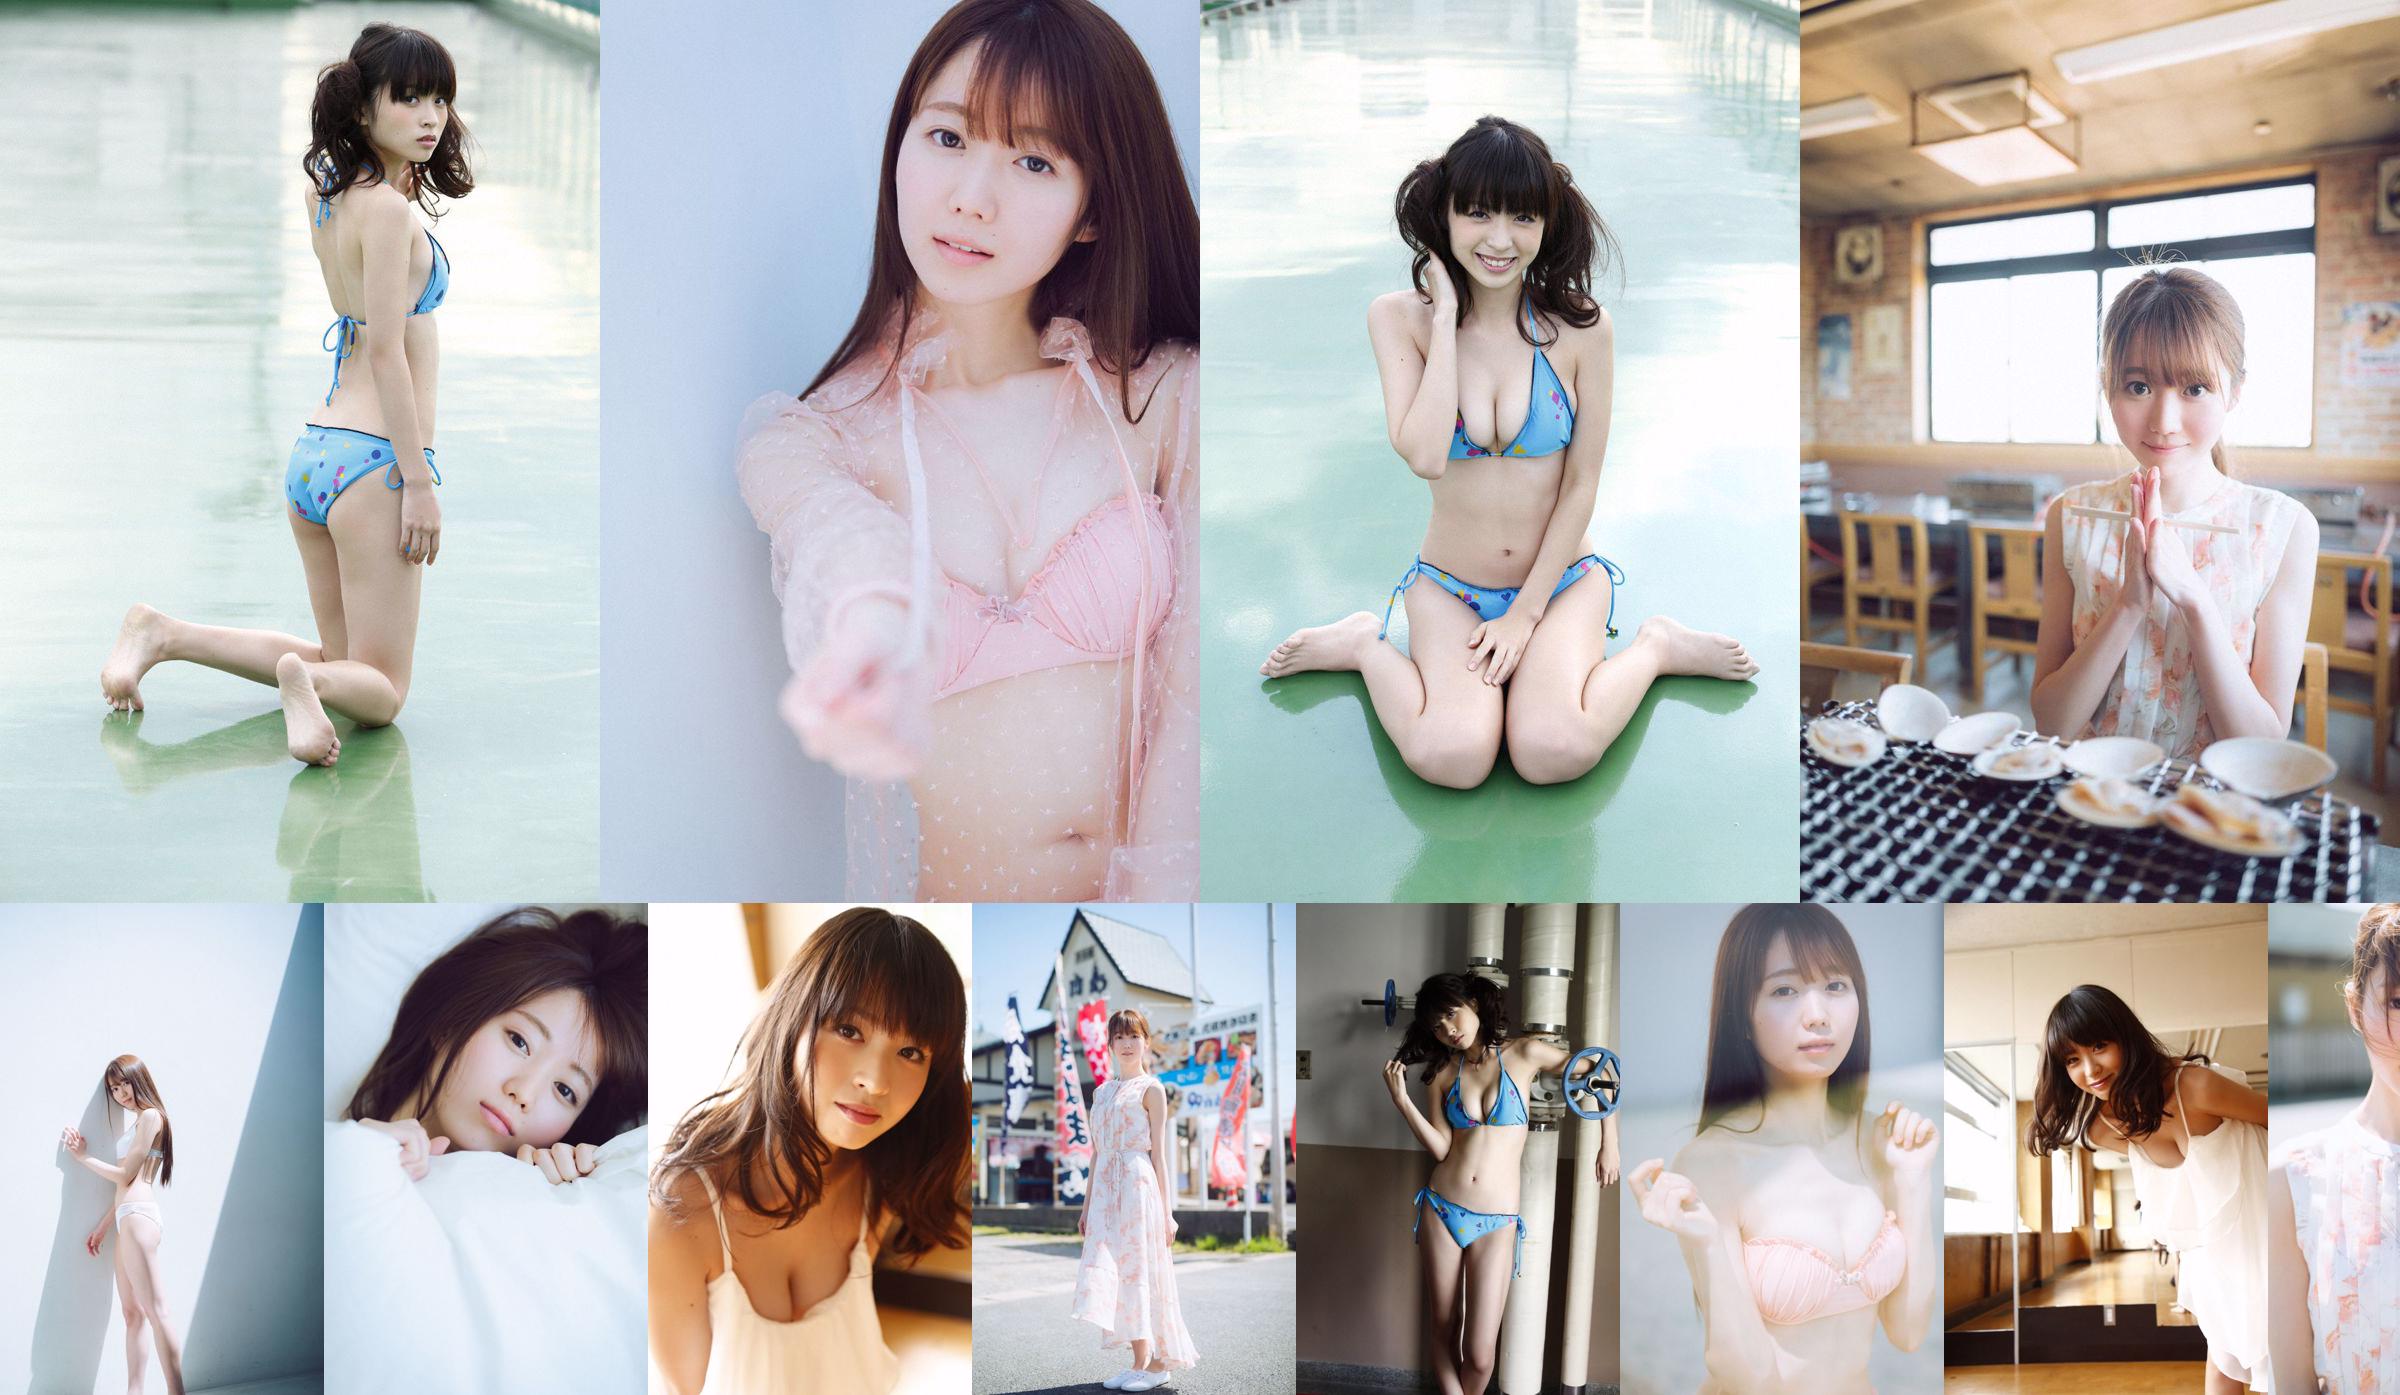 Emiri Otani "With you and two." [WPB-net] Extra734 No.b4cd43 Page 2